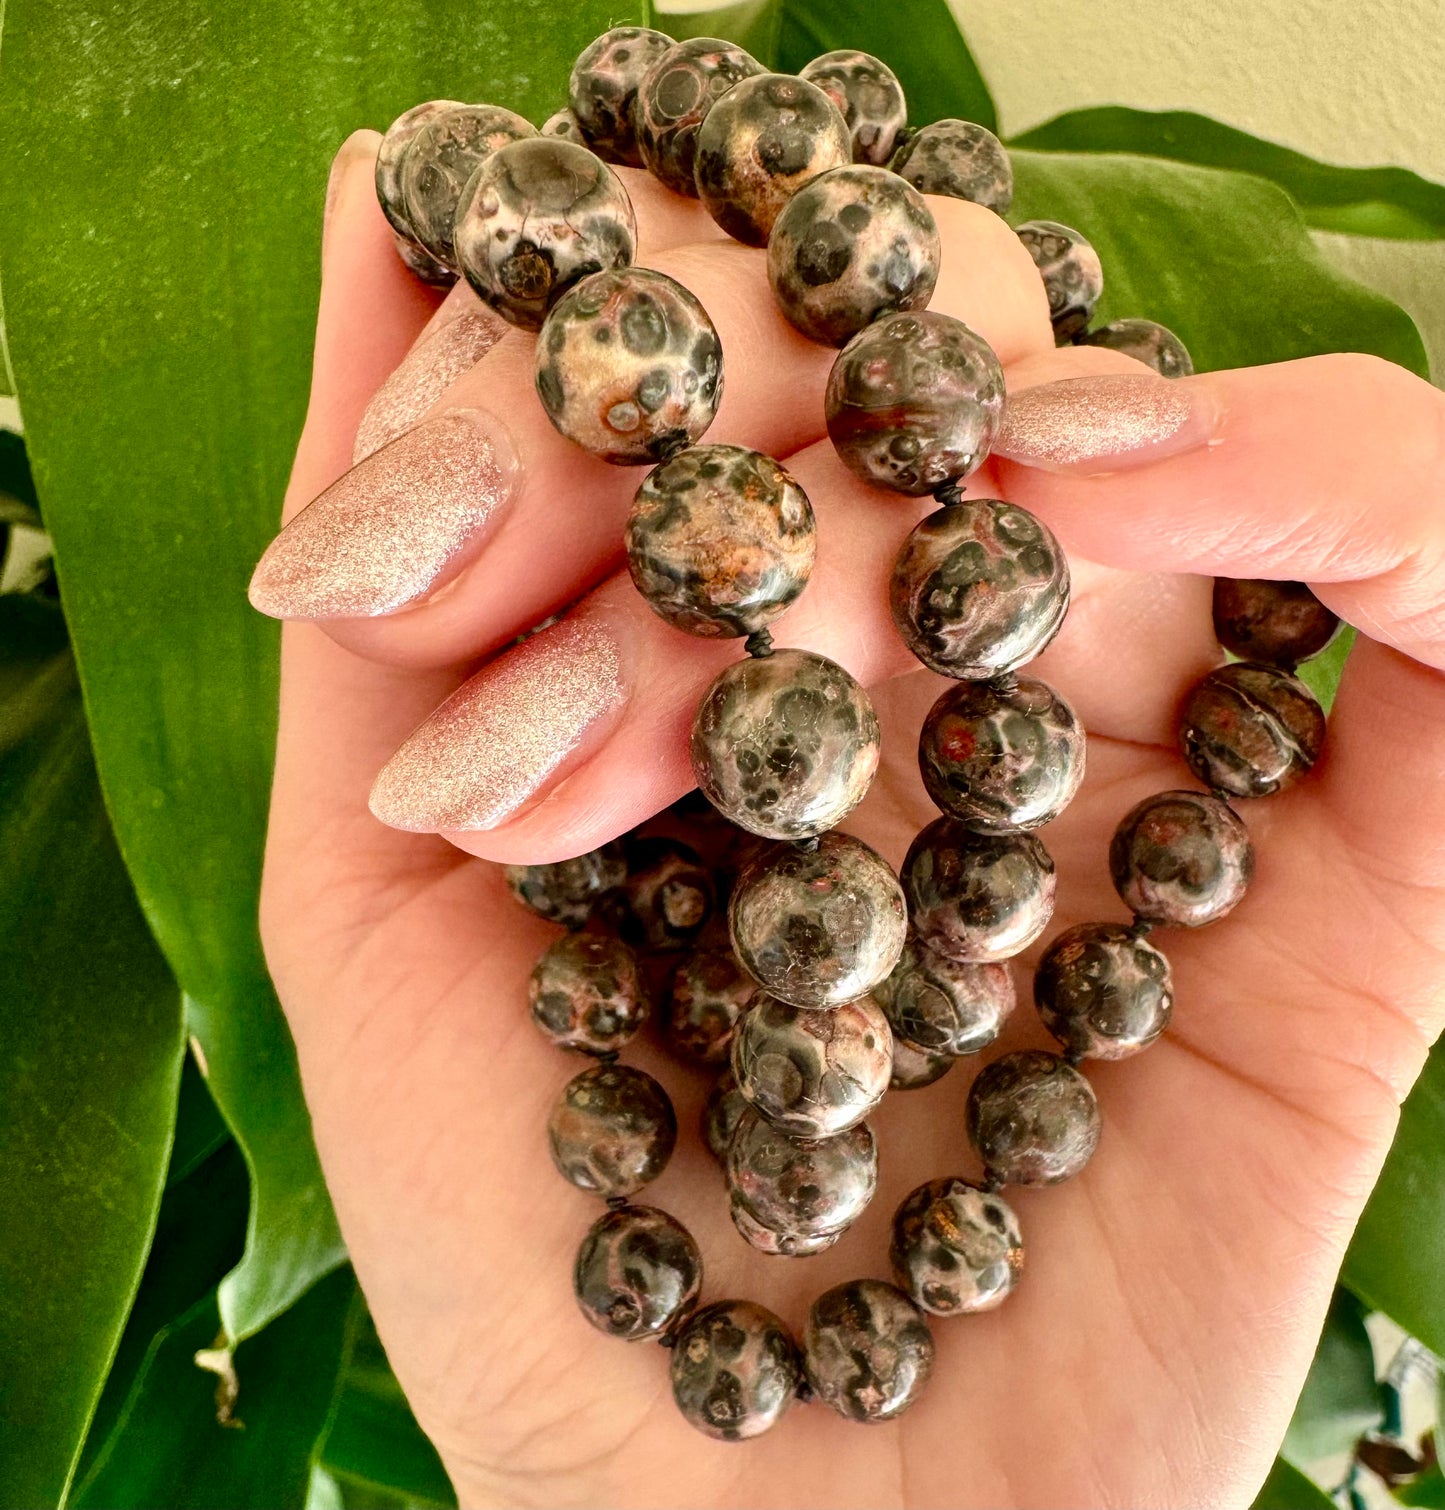 Crystal healing Leopardskin Jasper gemstone necklace known for attracting what you need for physical wellbeing